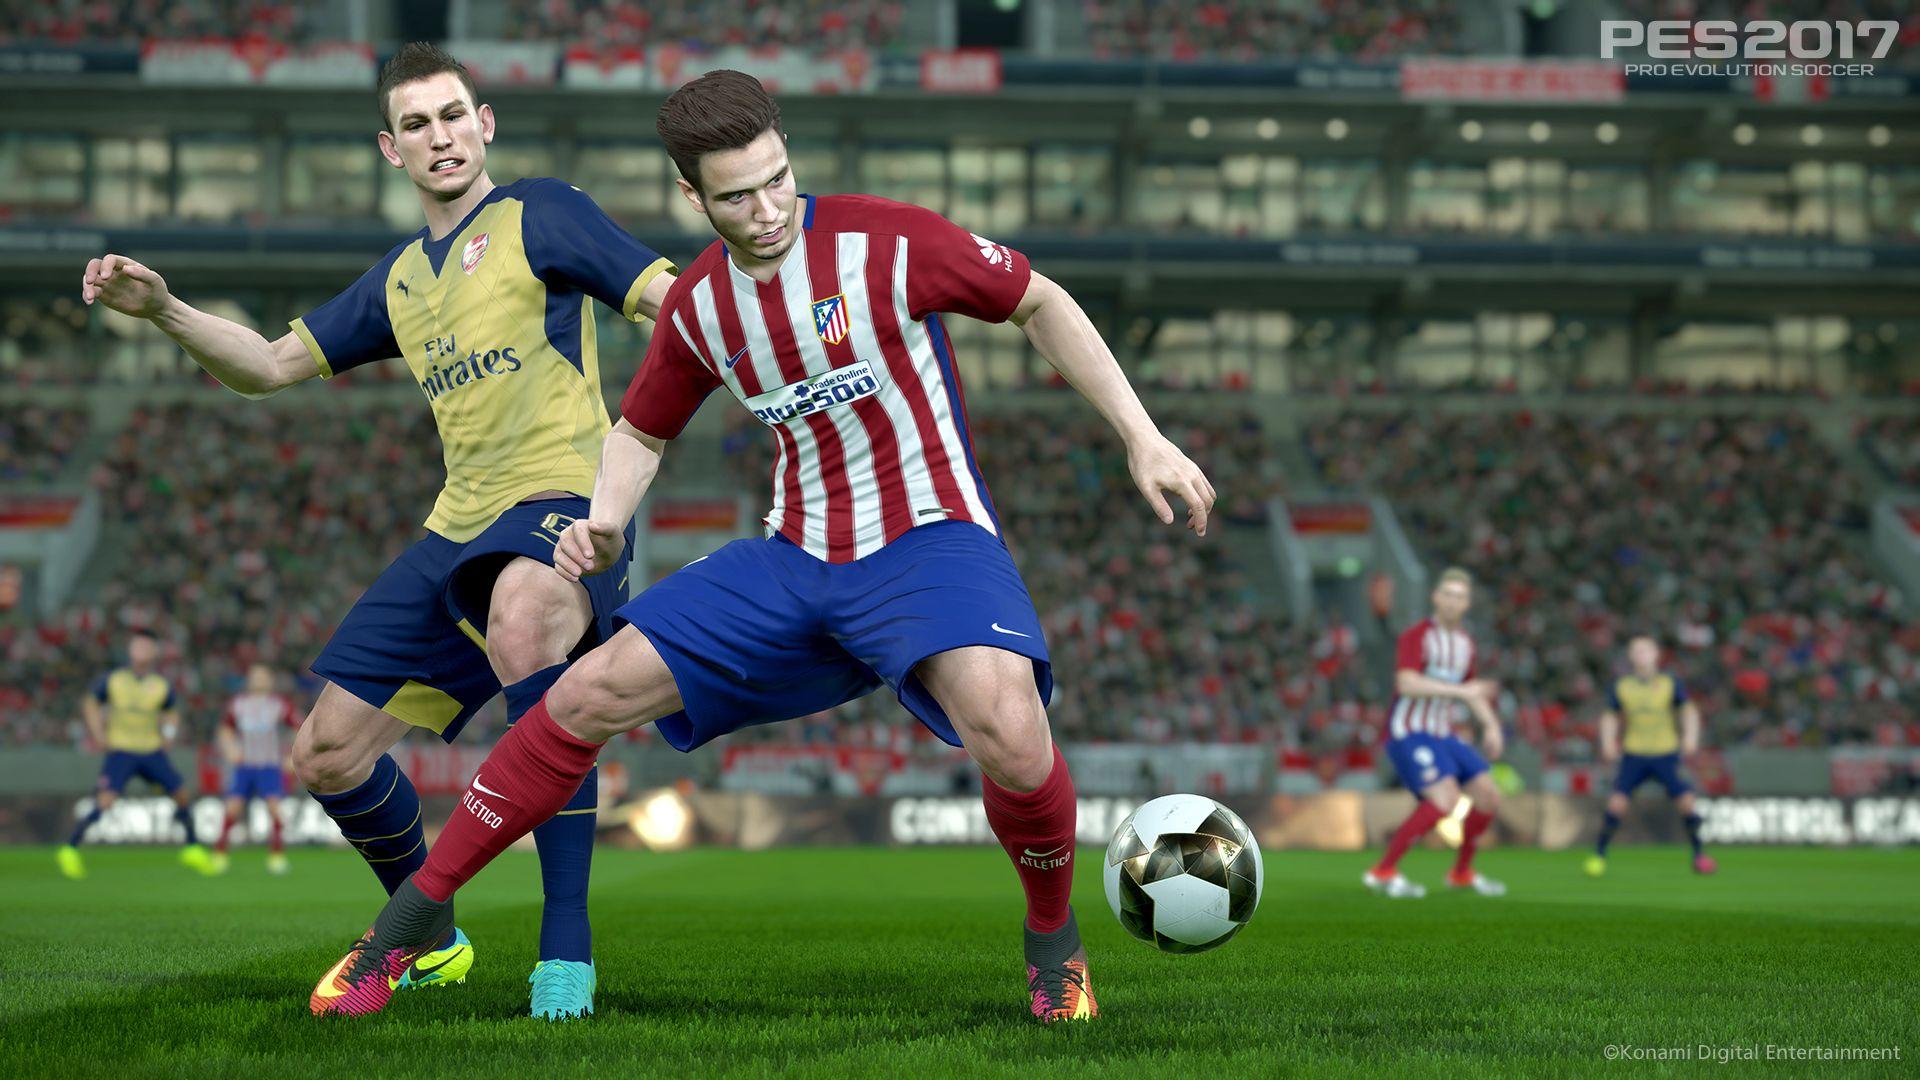 Hands on with Pro Evolution Soccer 2017